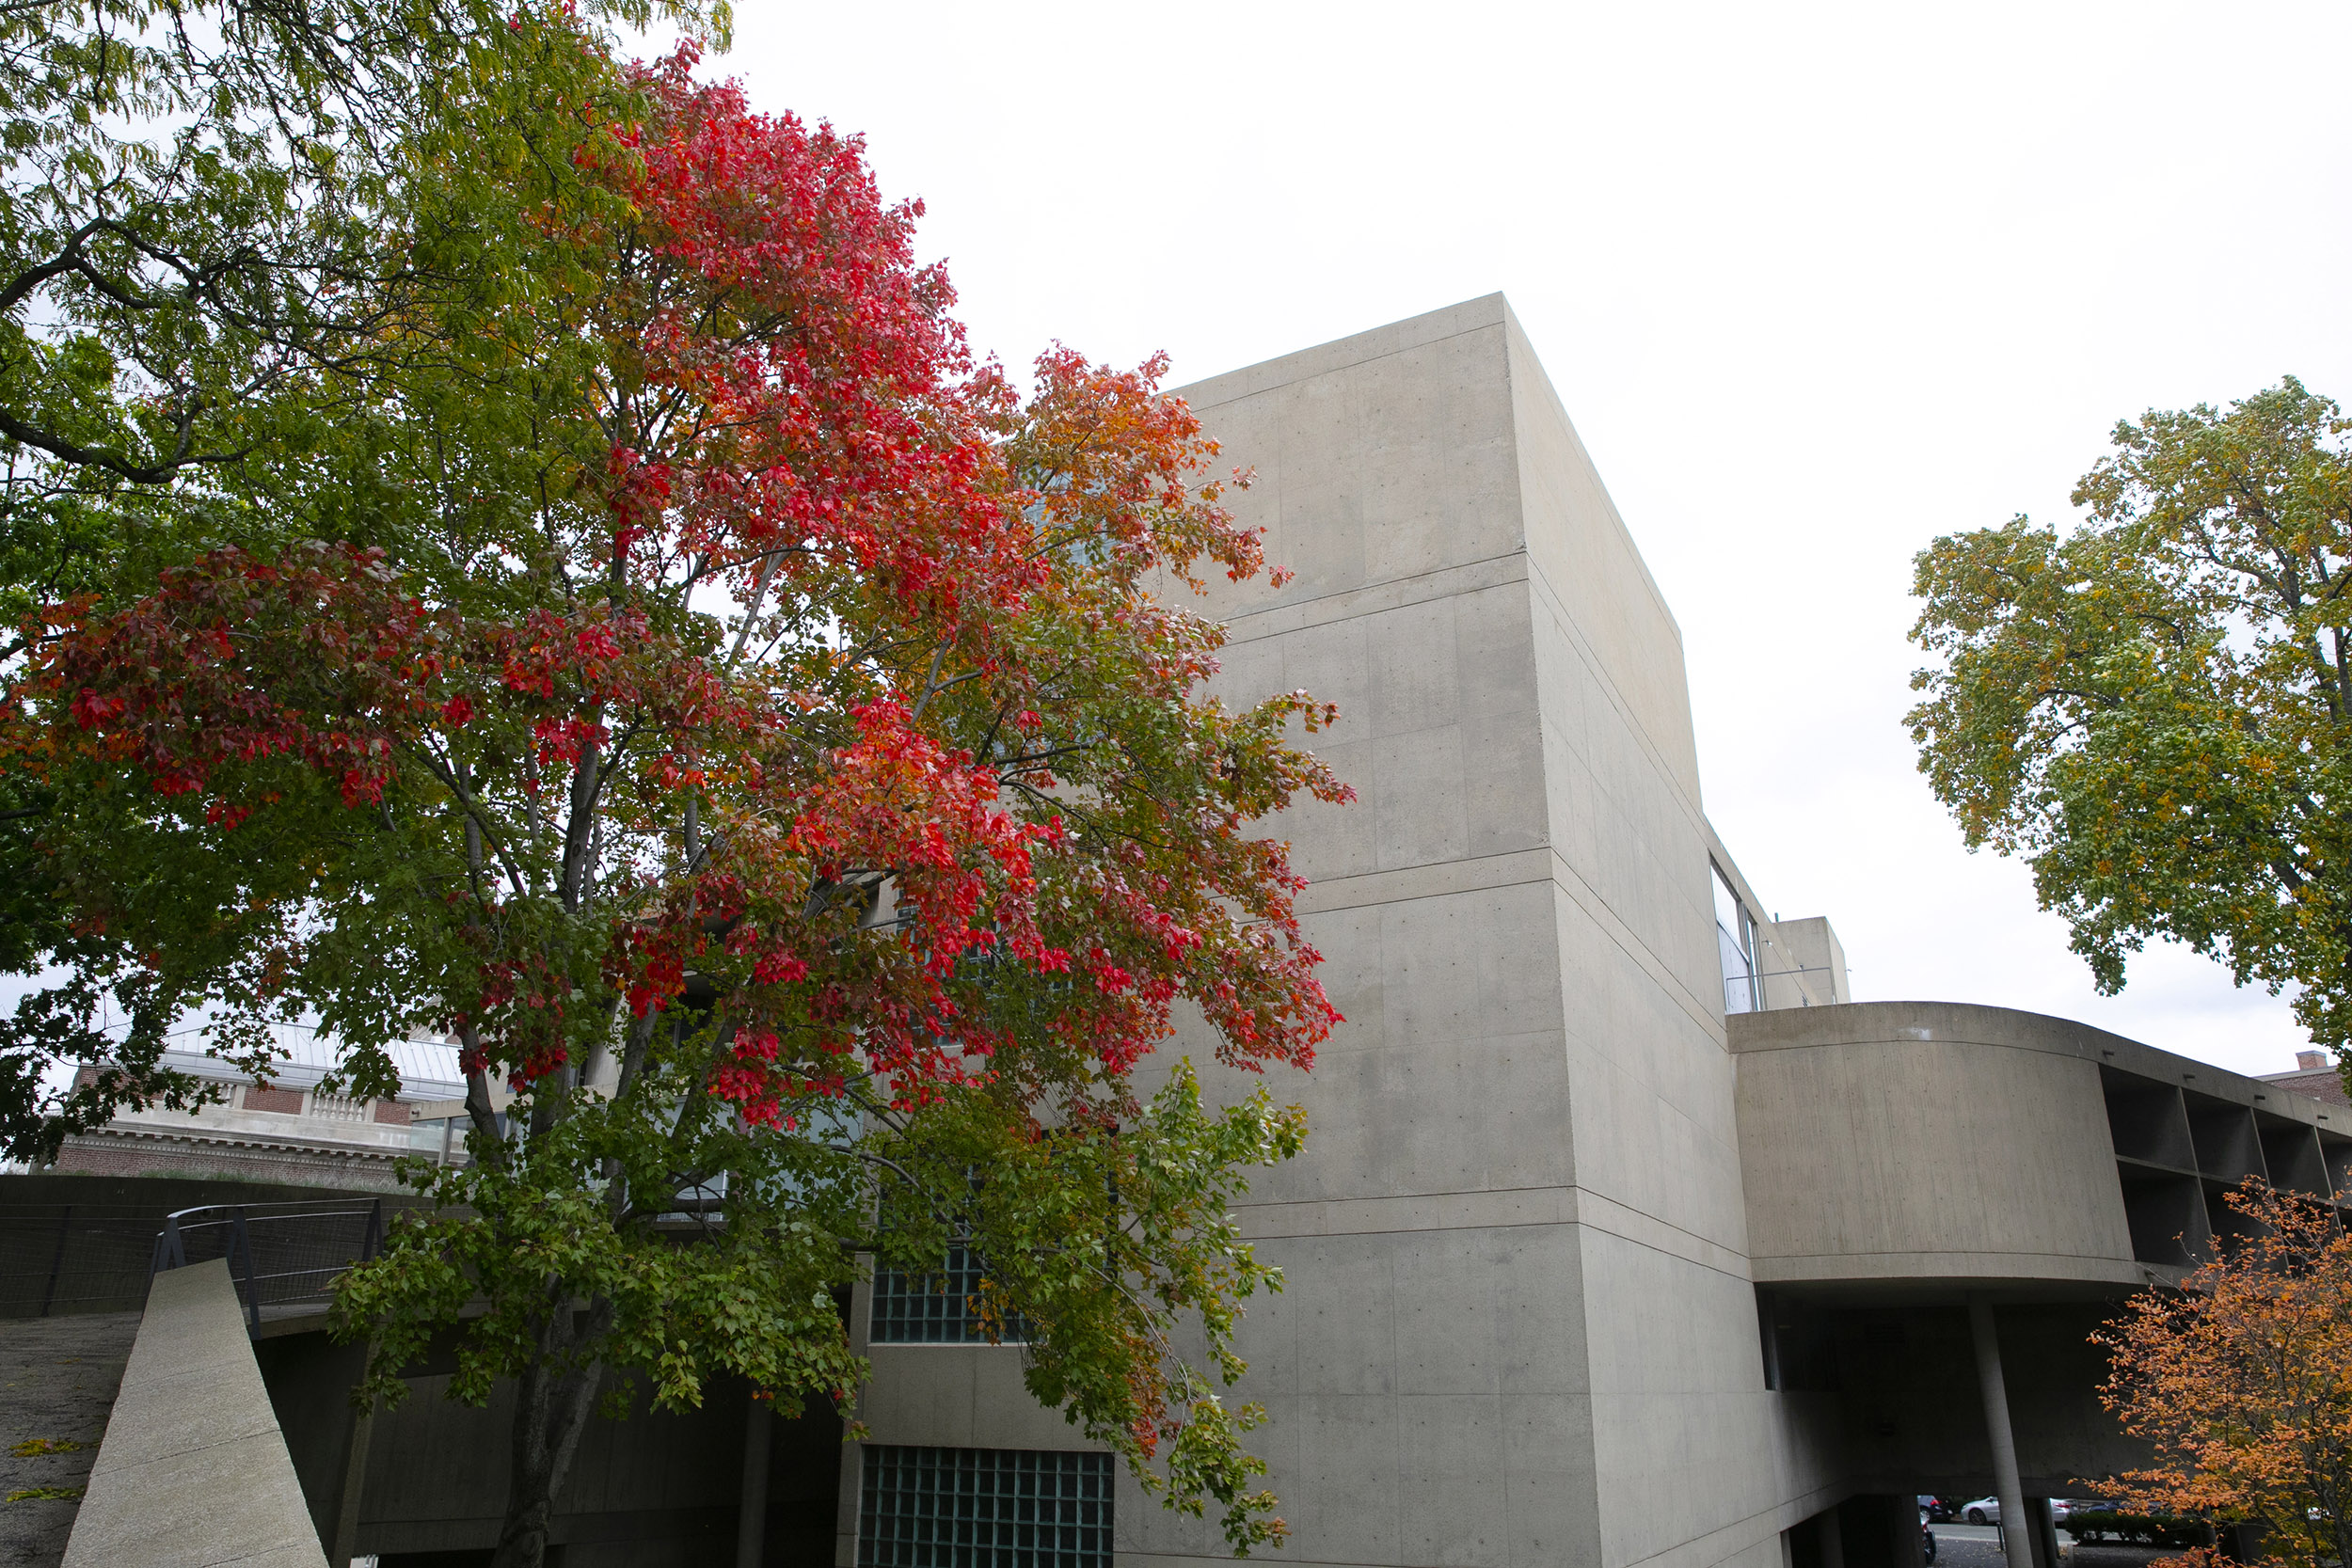 Autumn leaves are on display outside the Carpenter Center.